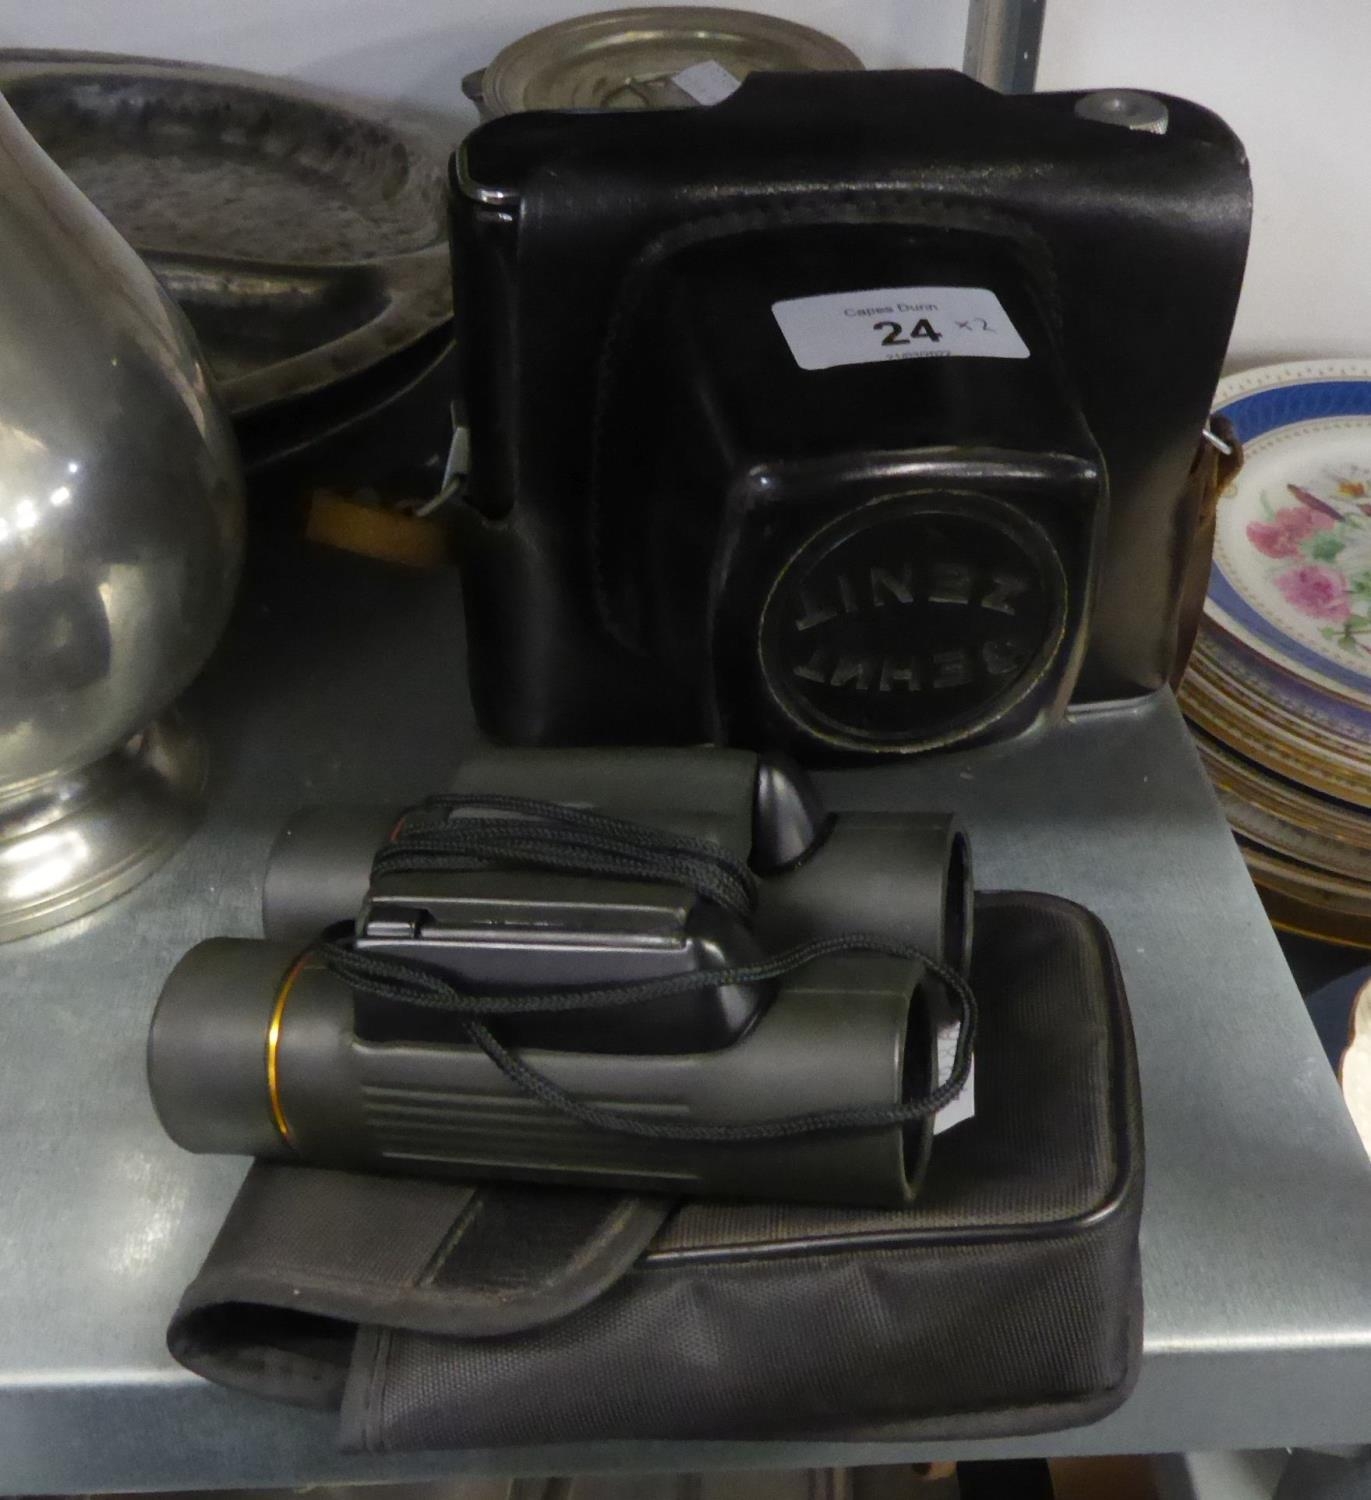 A PAIR OF 10 X 25 COMPACT BINOCULARS AND A ZENIT ? E SLR ROLL FILM CAMERA, IN CASE - Image 2 of 2